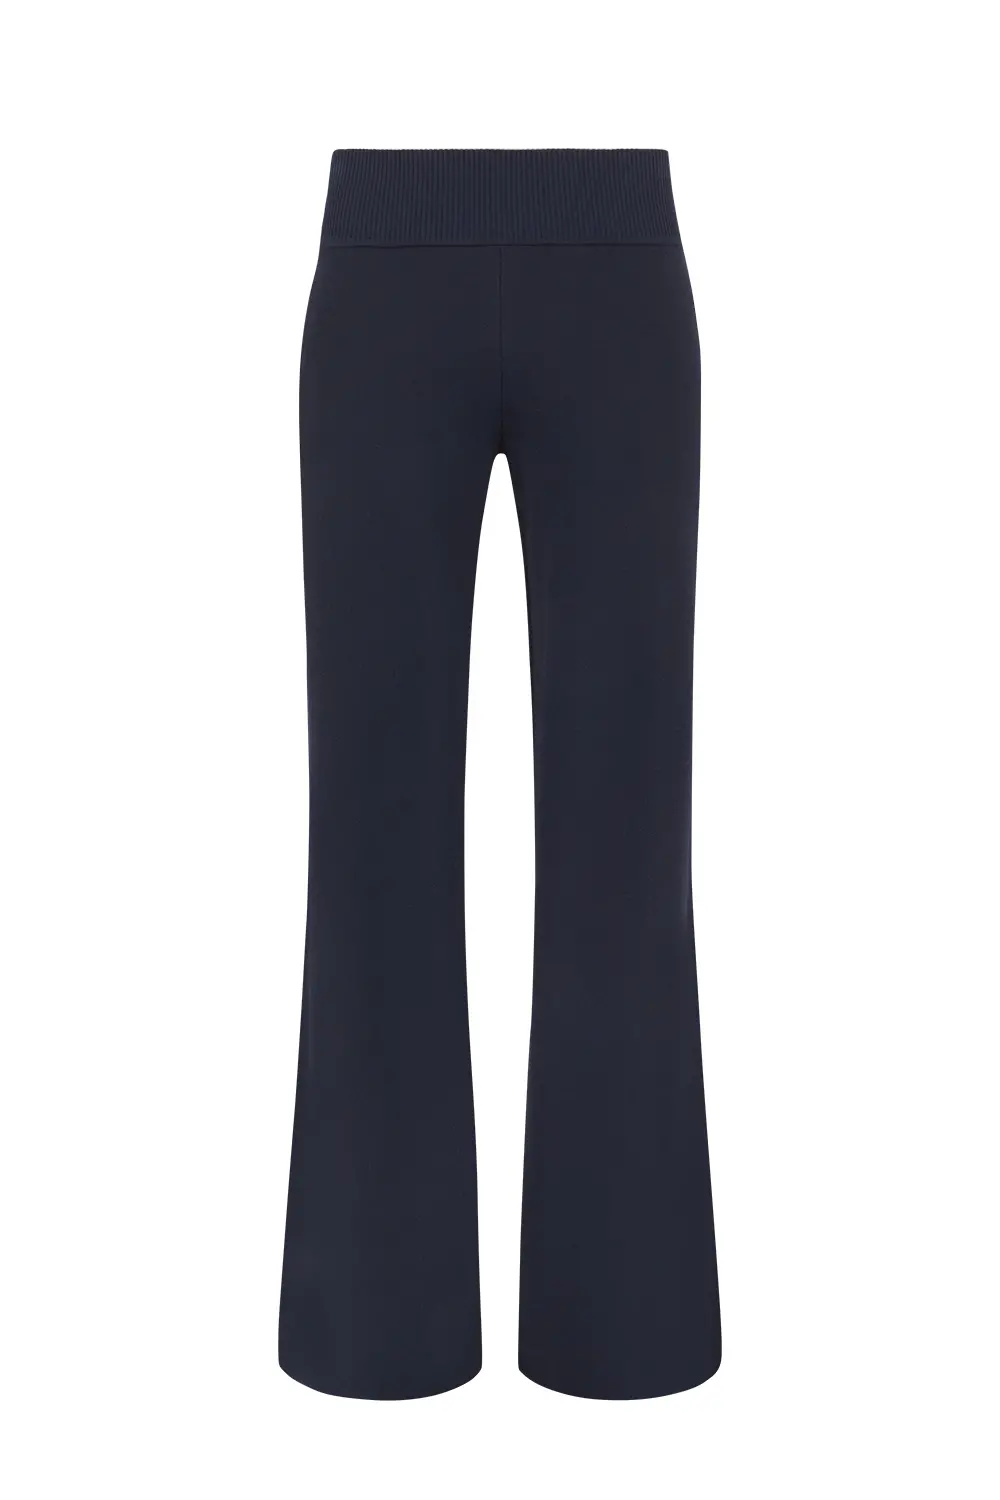 P.A.R.O.S.H. flared knit trousers - Blue